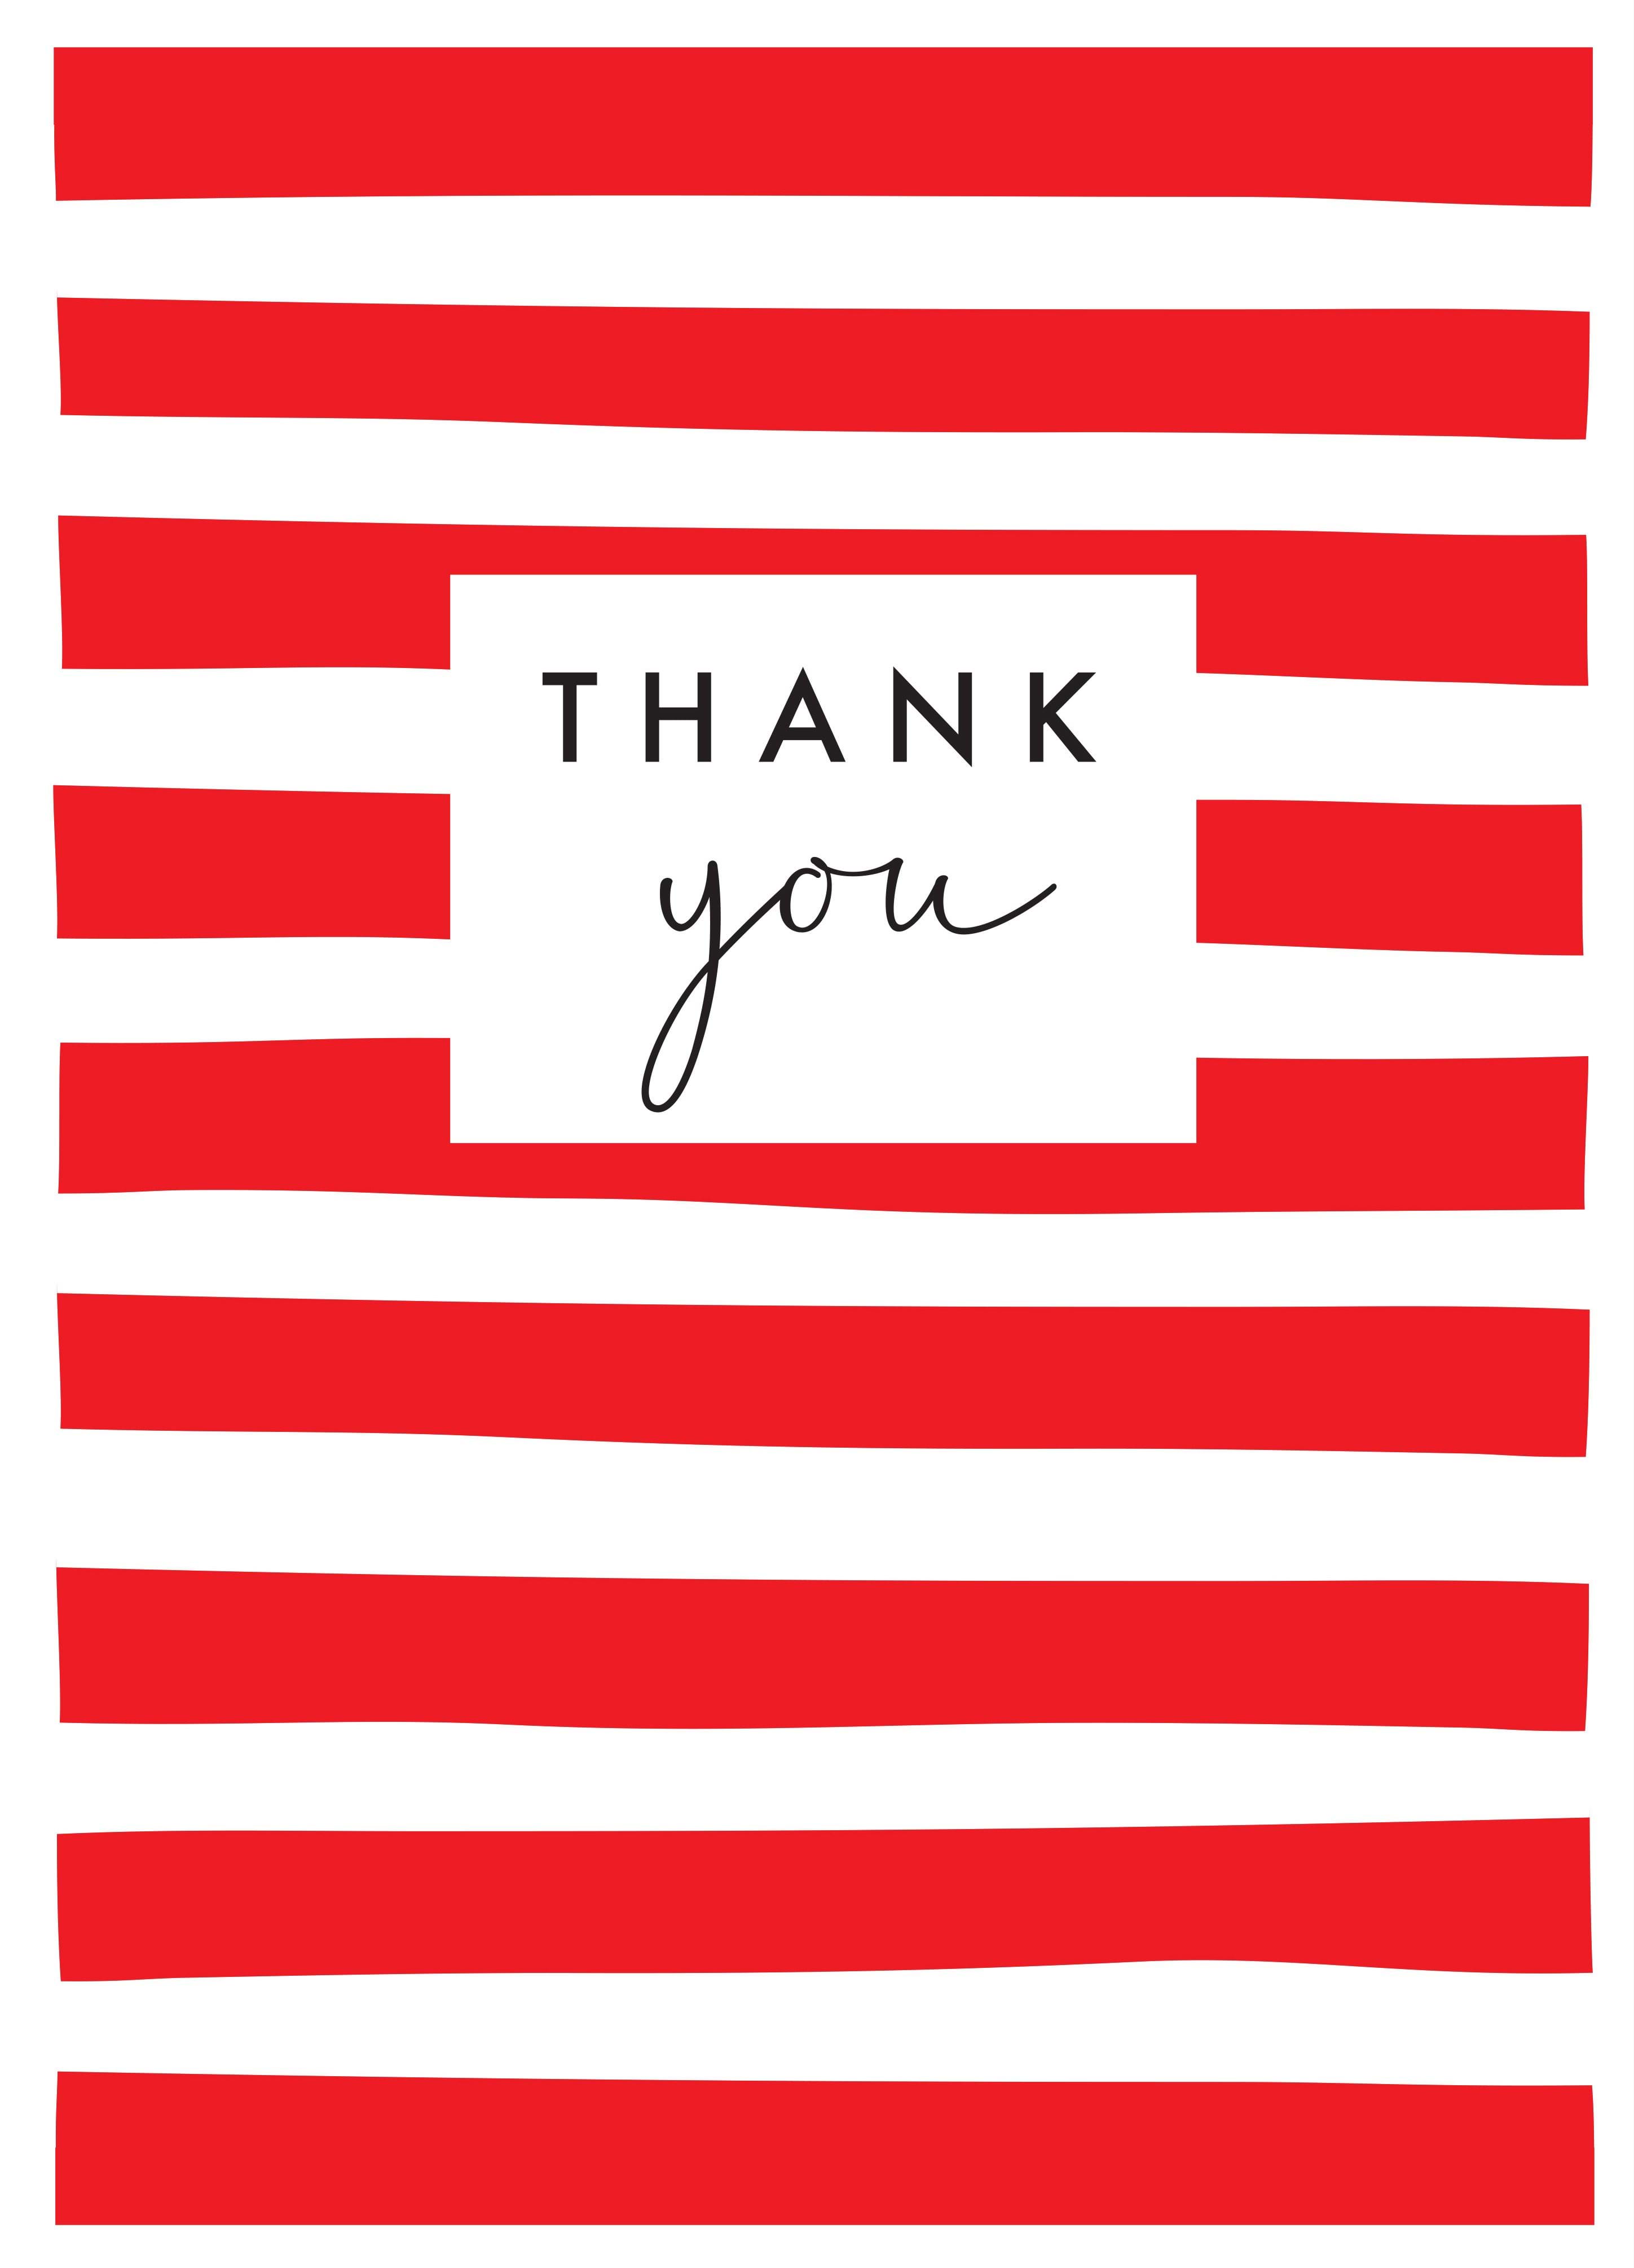 Red Stripes Christmas Thank You Pack (8)